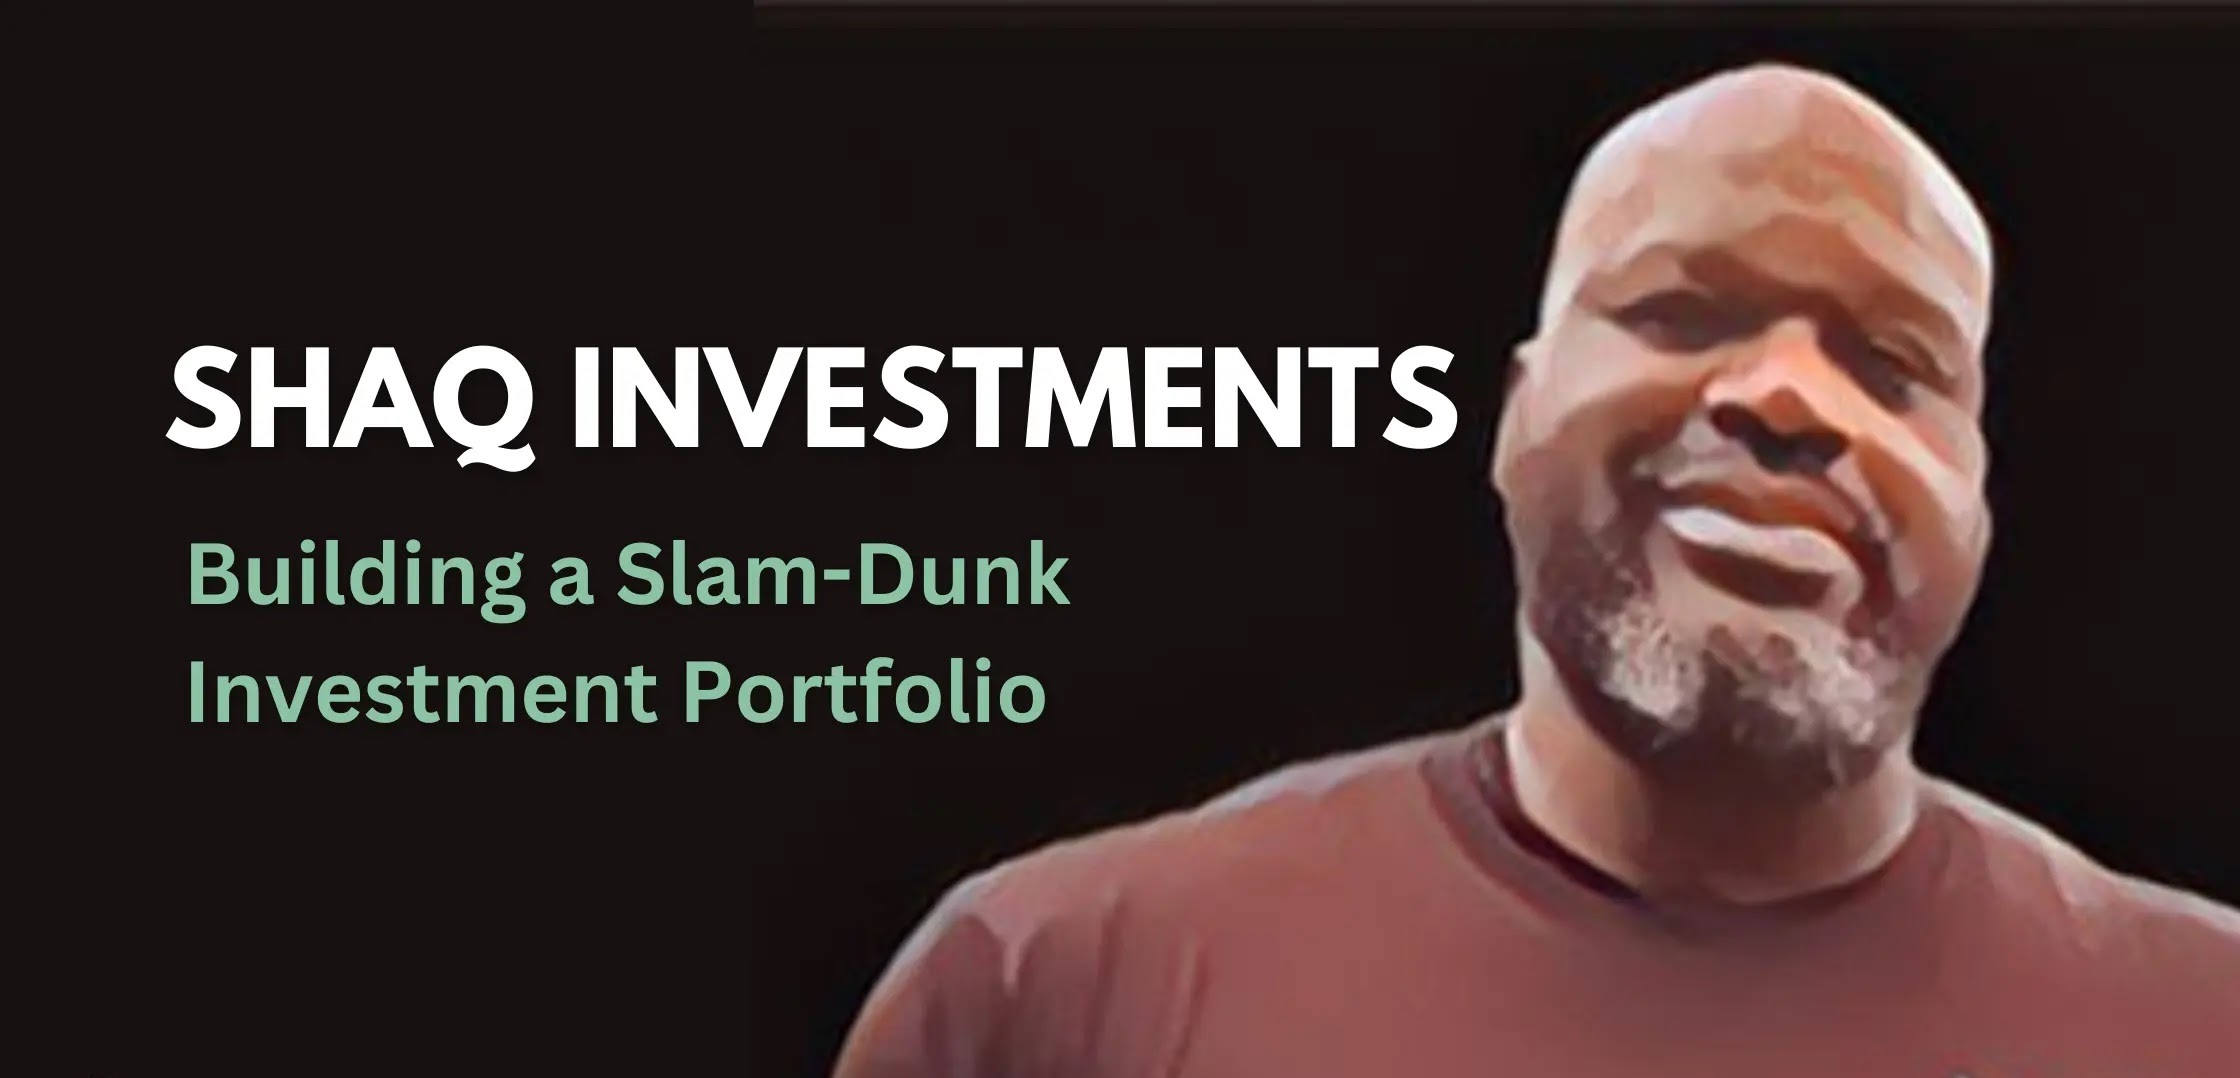 What Are Shaq”s Investments